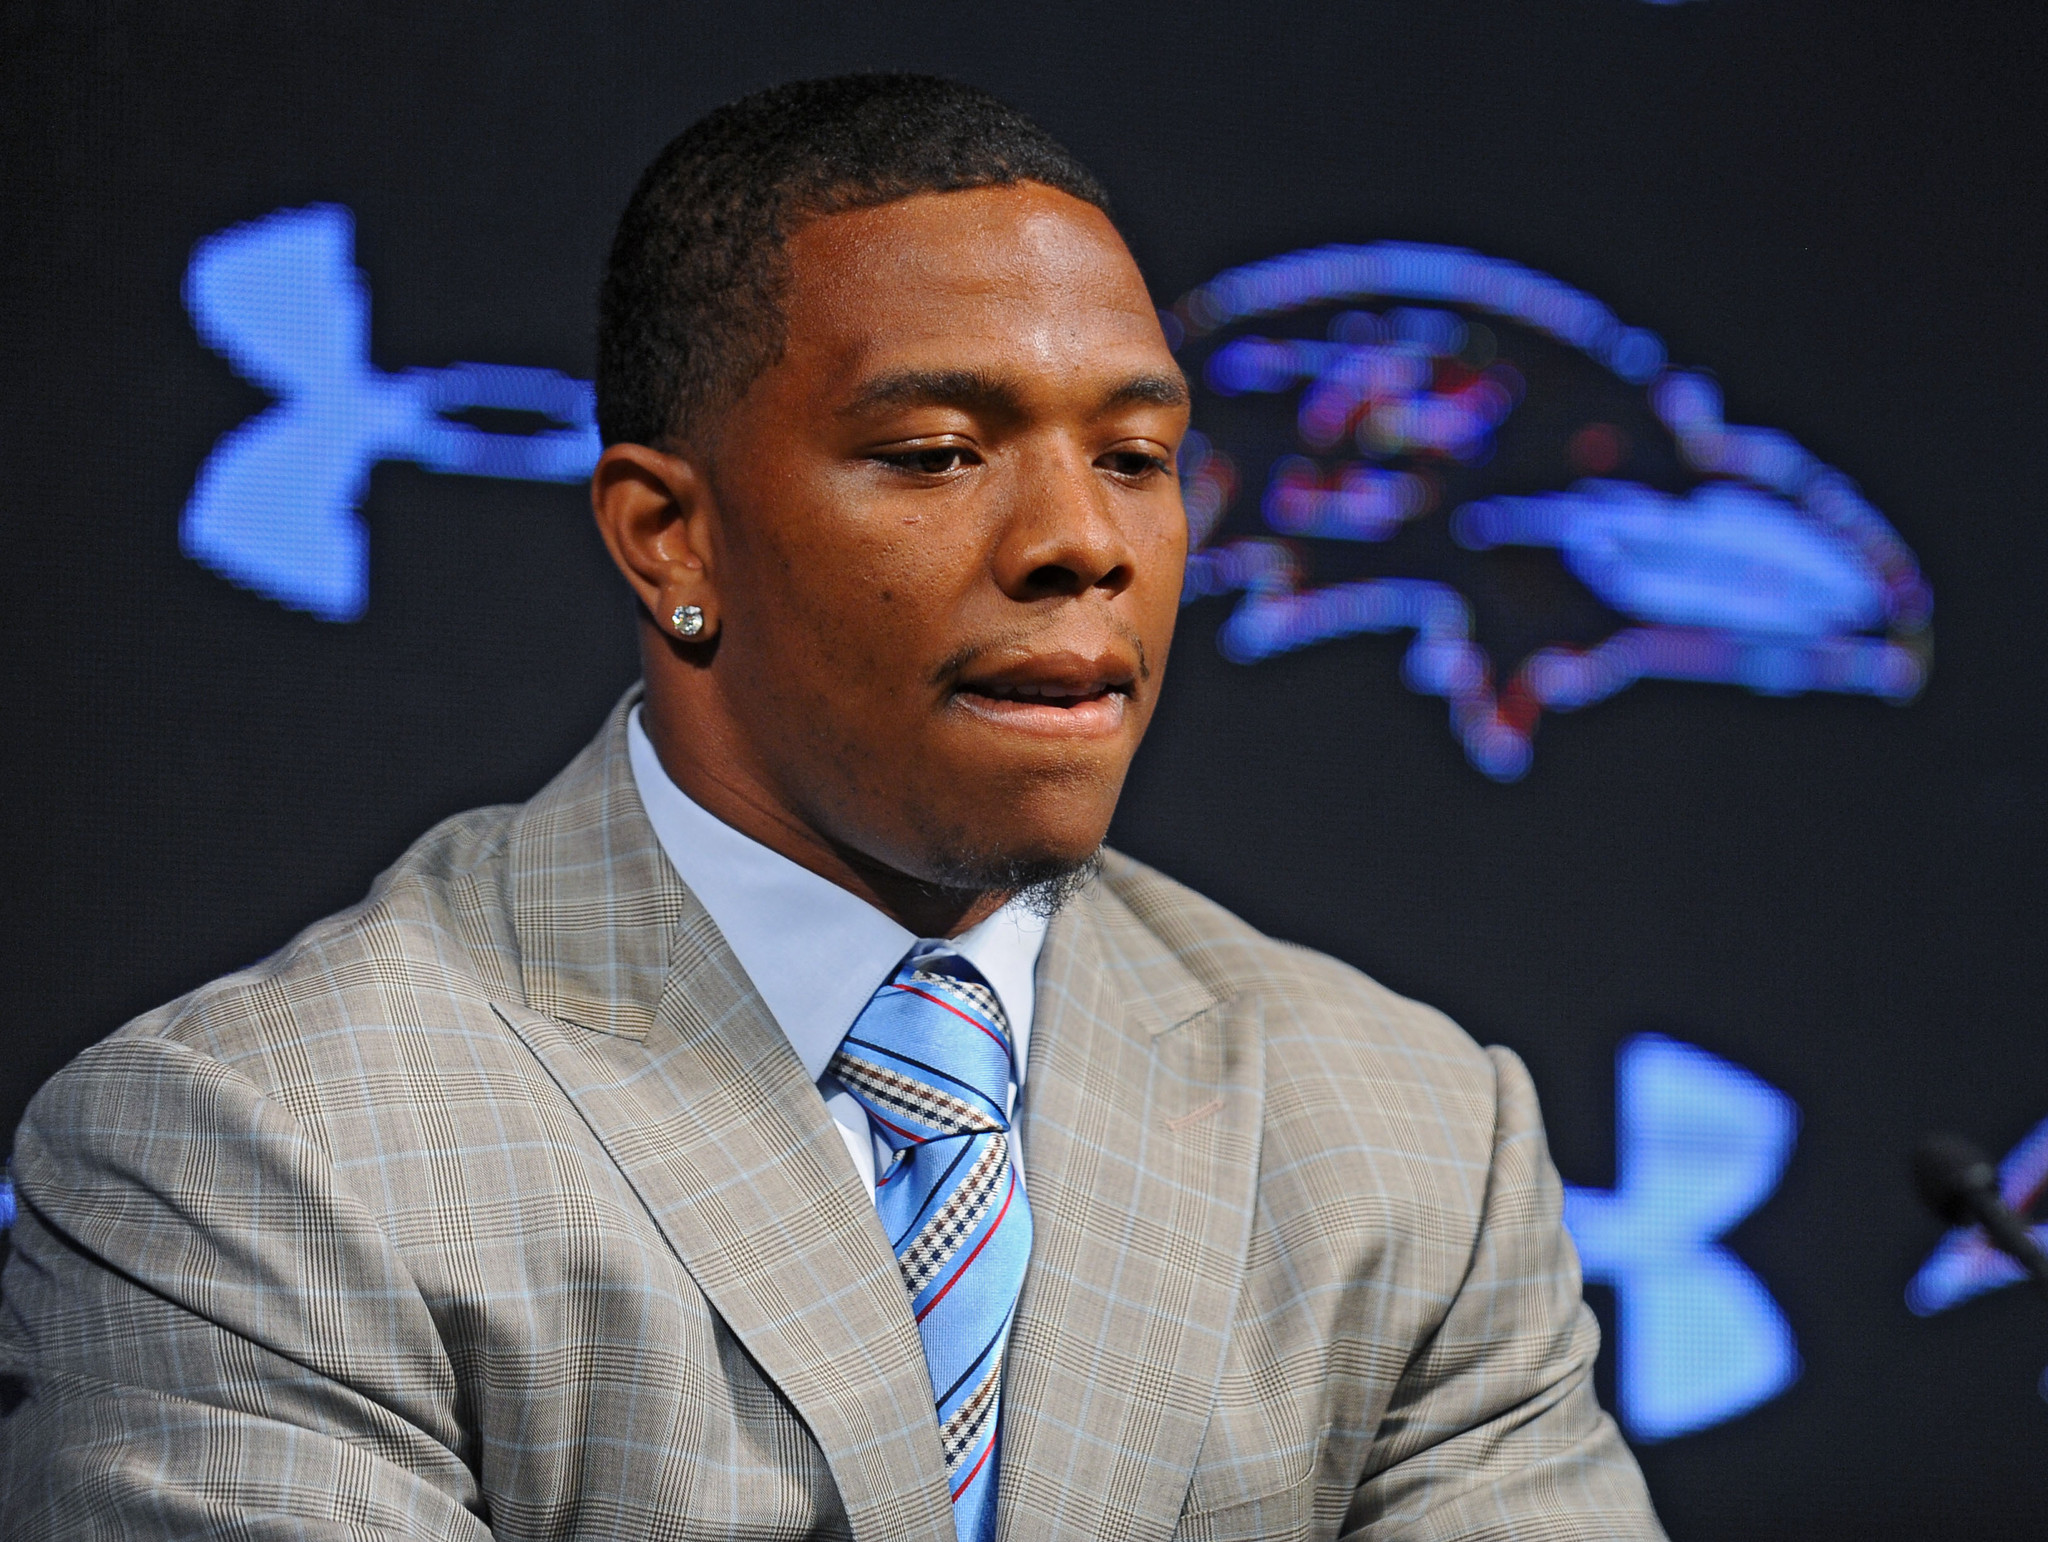 New Video Shows Aftermath of Ray Rice Elevator Incident 